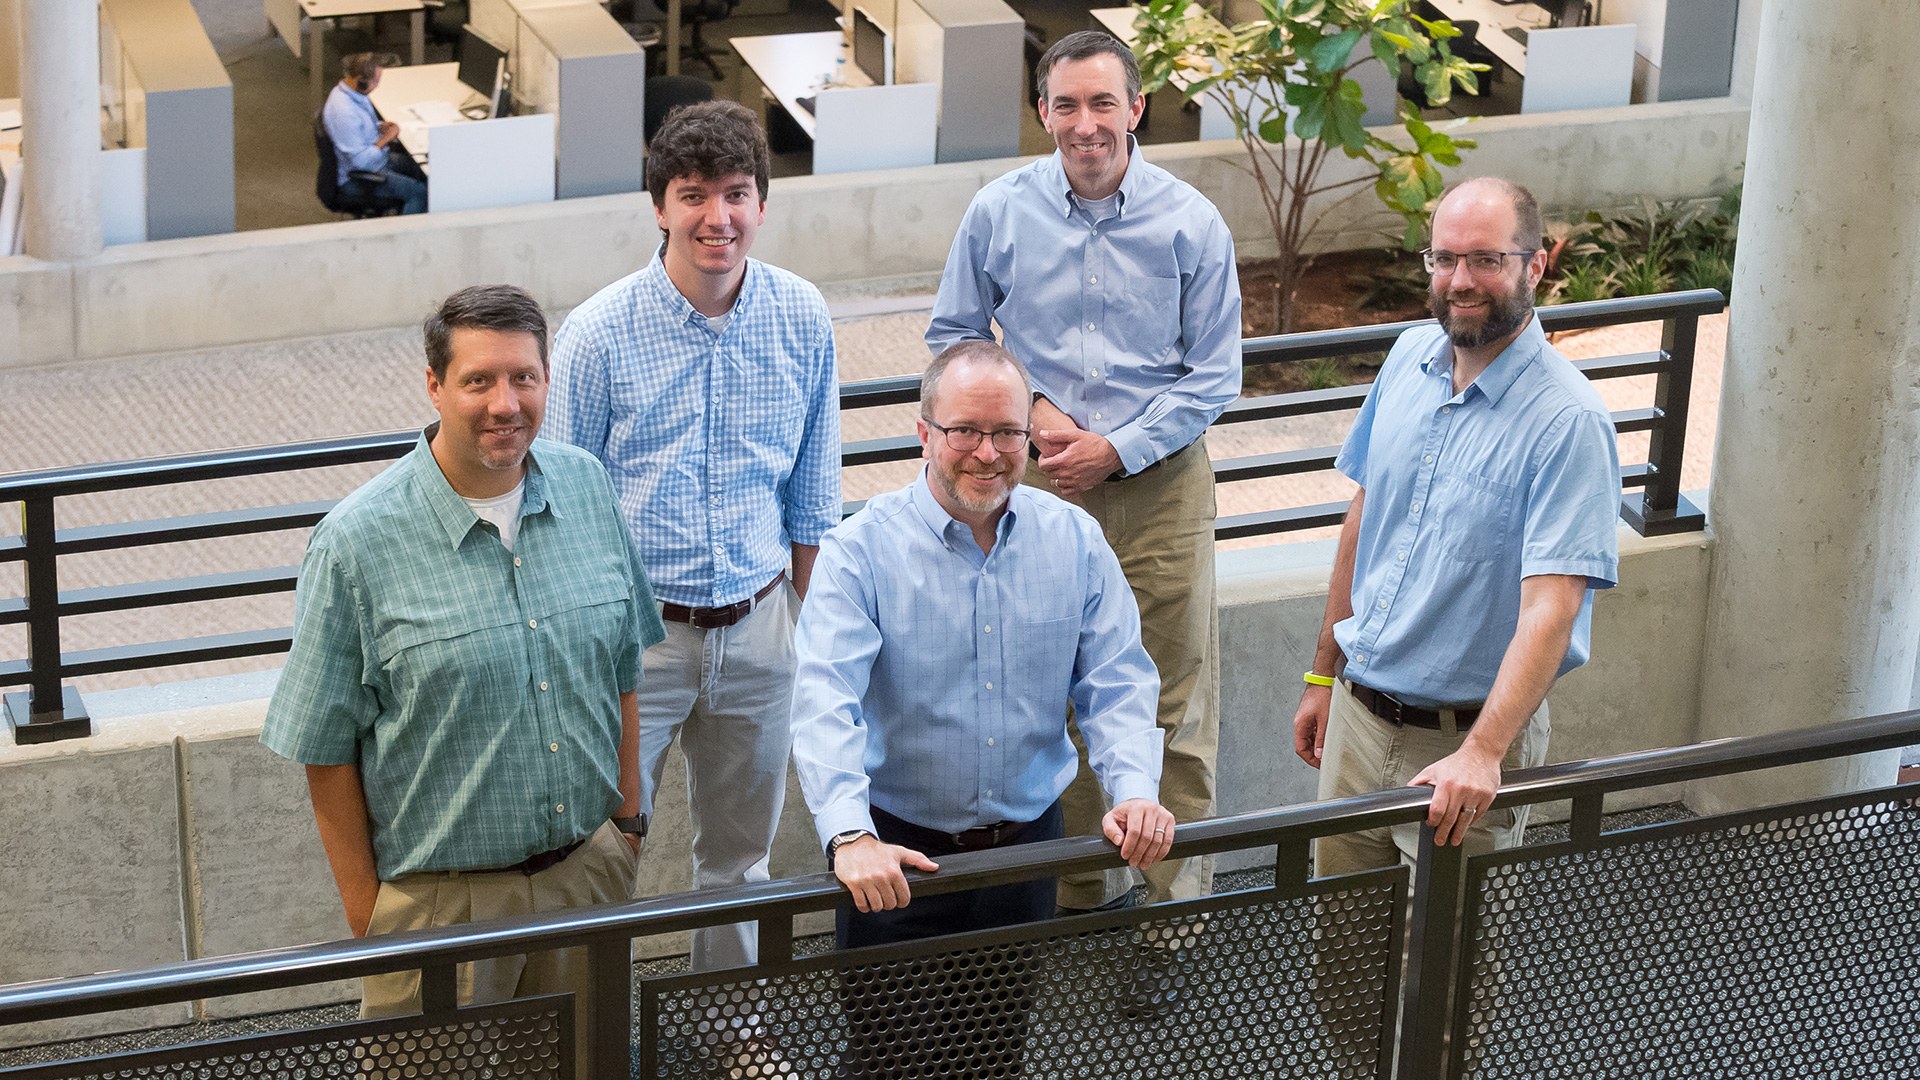 (From left) Kevin Harms, Shane Snyder, Philip Carns, Robert Ross and Robert Latham of the Darshan team. (Image by Argonne National Laboratory.)